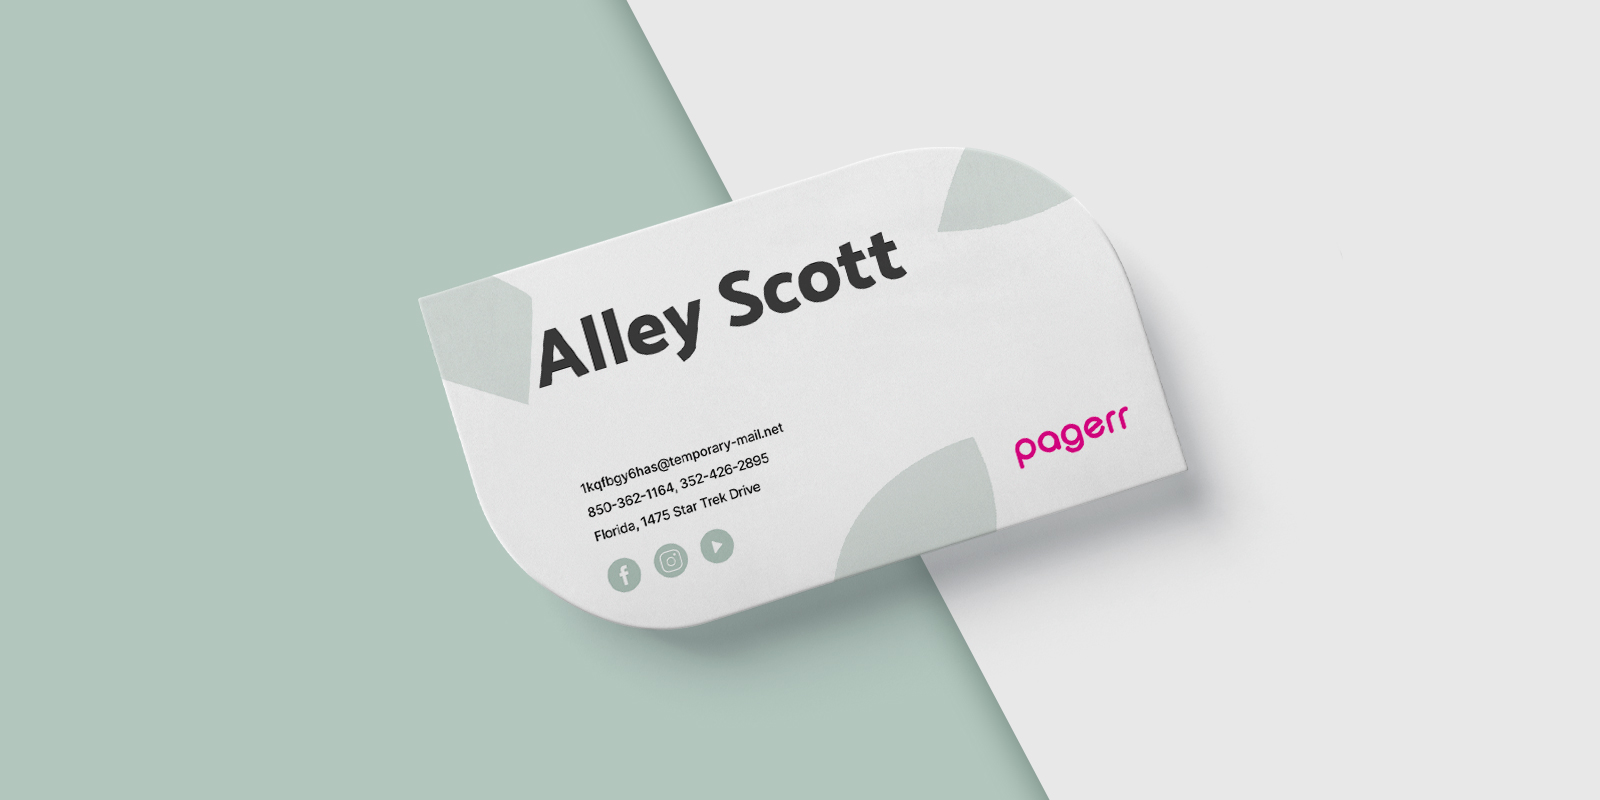 Special shape business cards in Darwin - Print with Pagerr